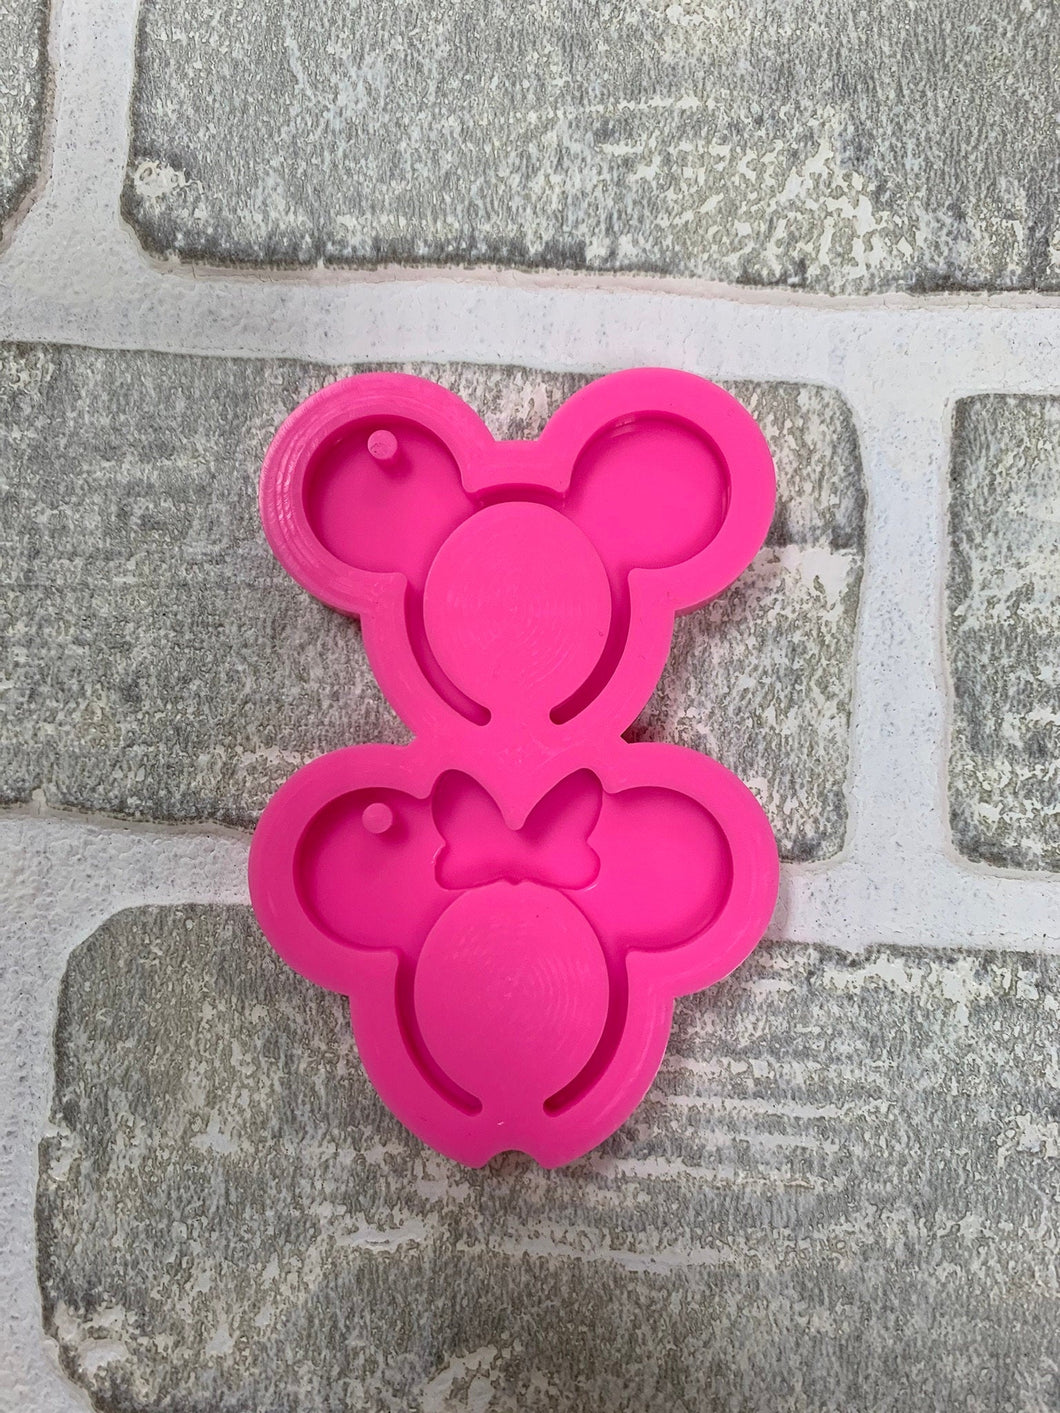 Mouse molds